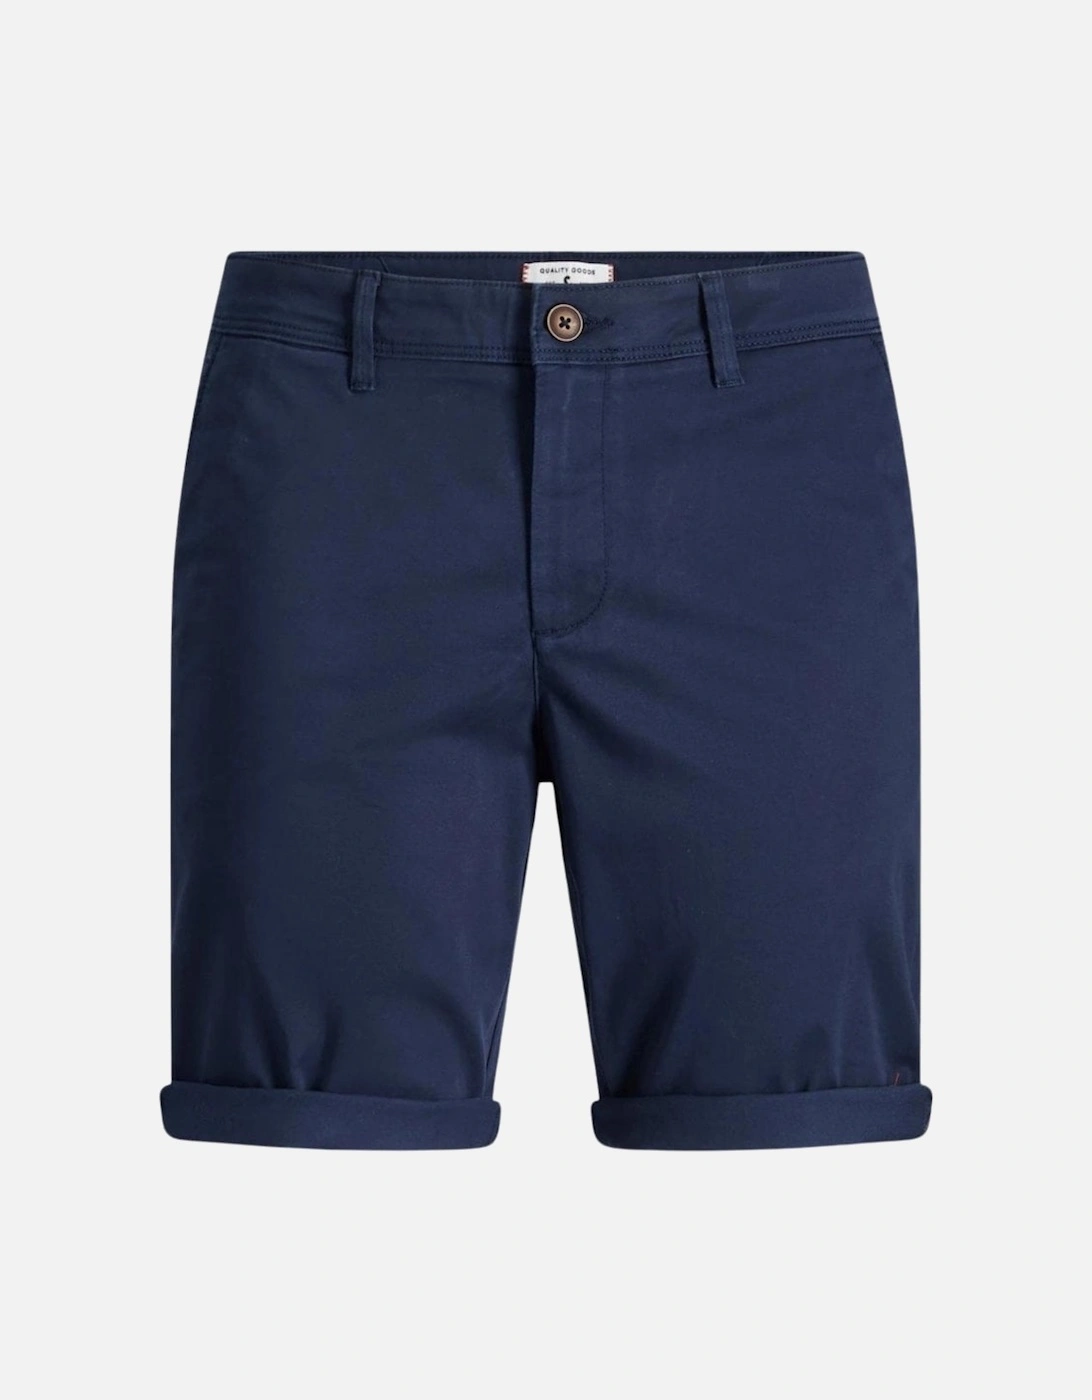 Bowie Chino Shorts - Navy Blue, 9 of 8